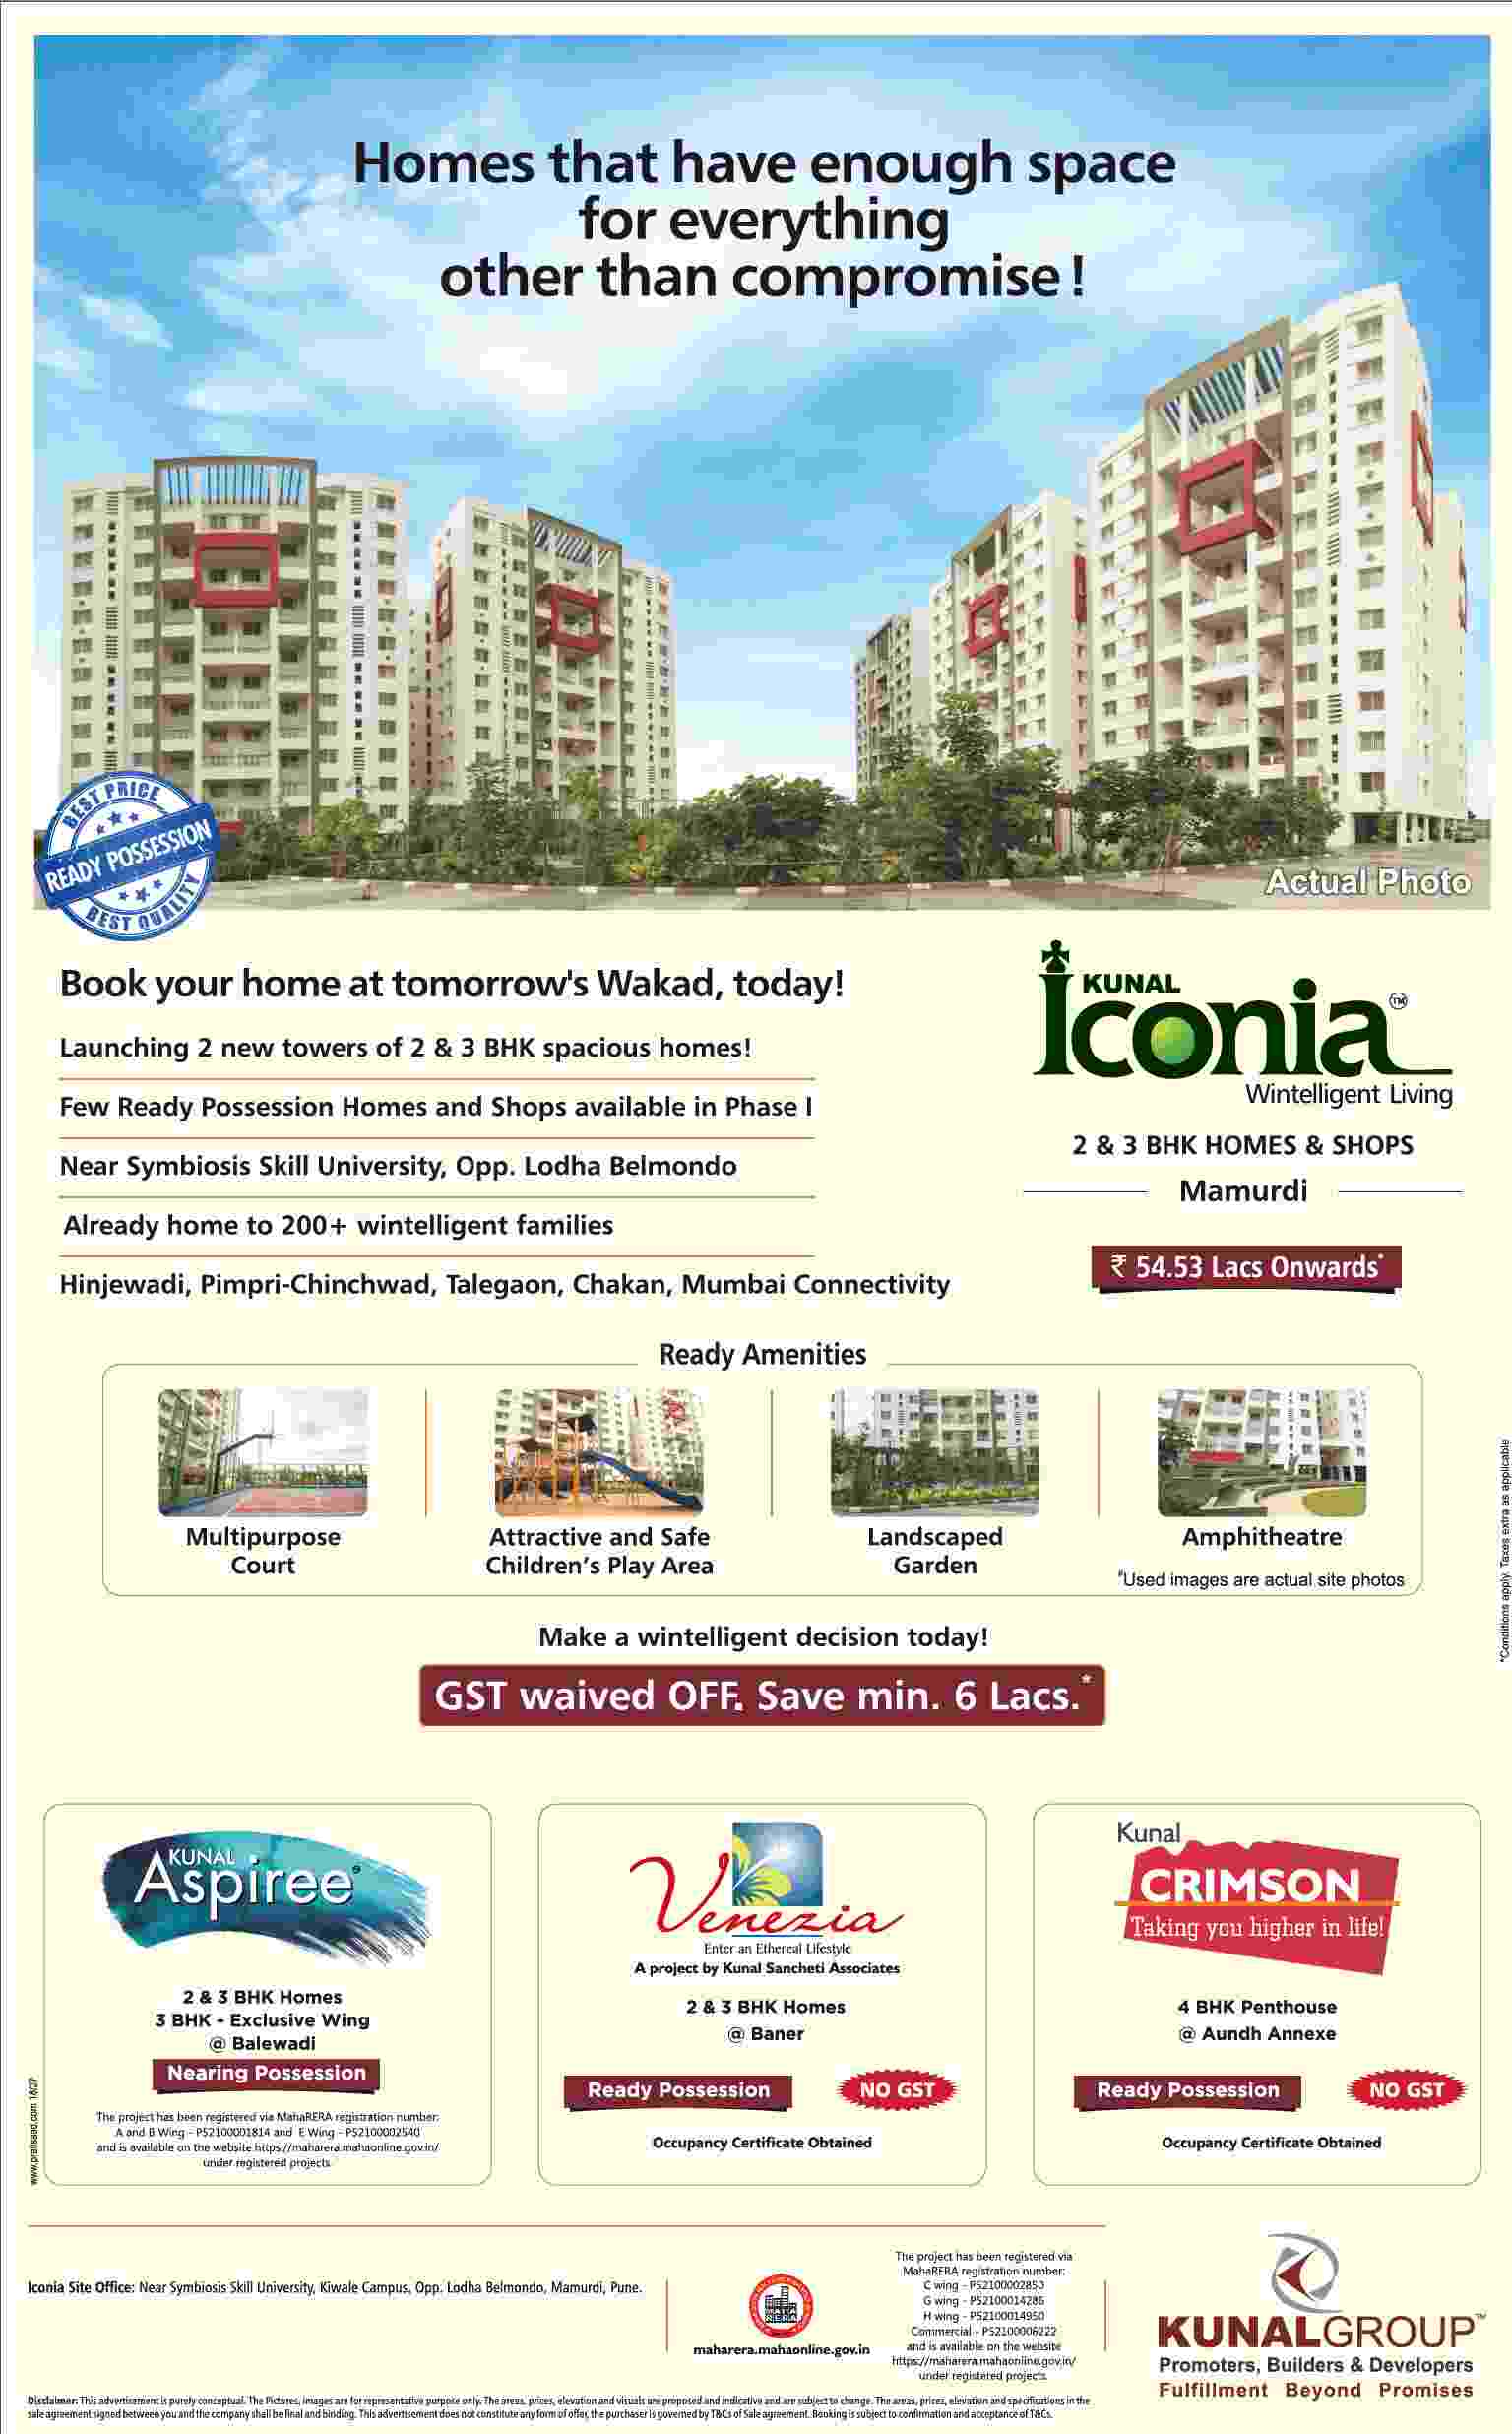 Book ready possession homes @ 54.53 lacs onwards at Kunal Iconia in Pune Update